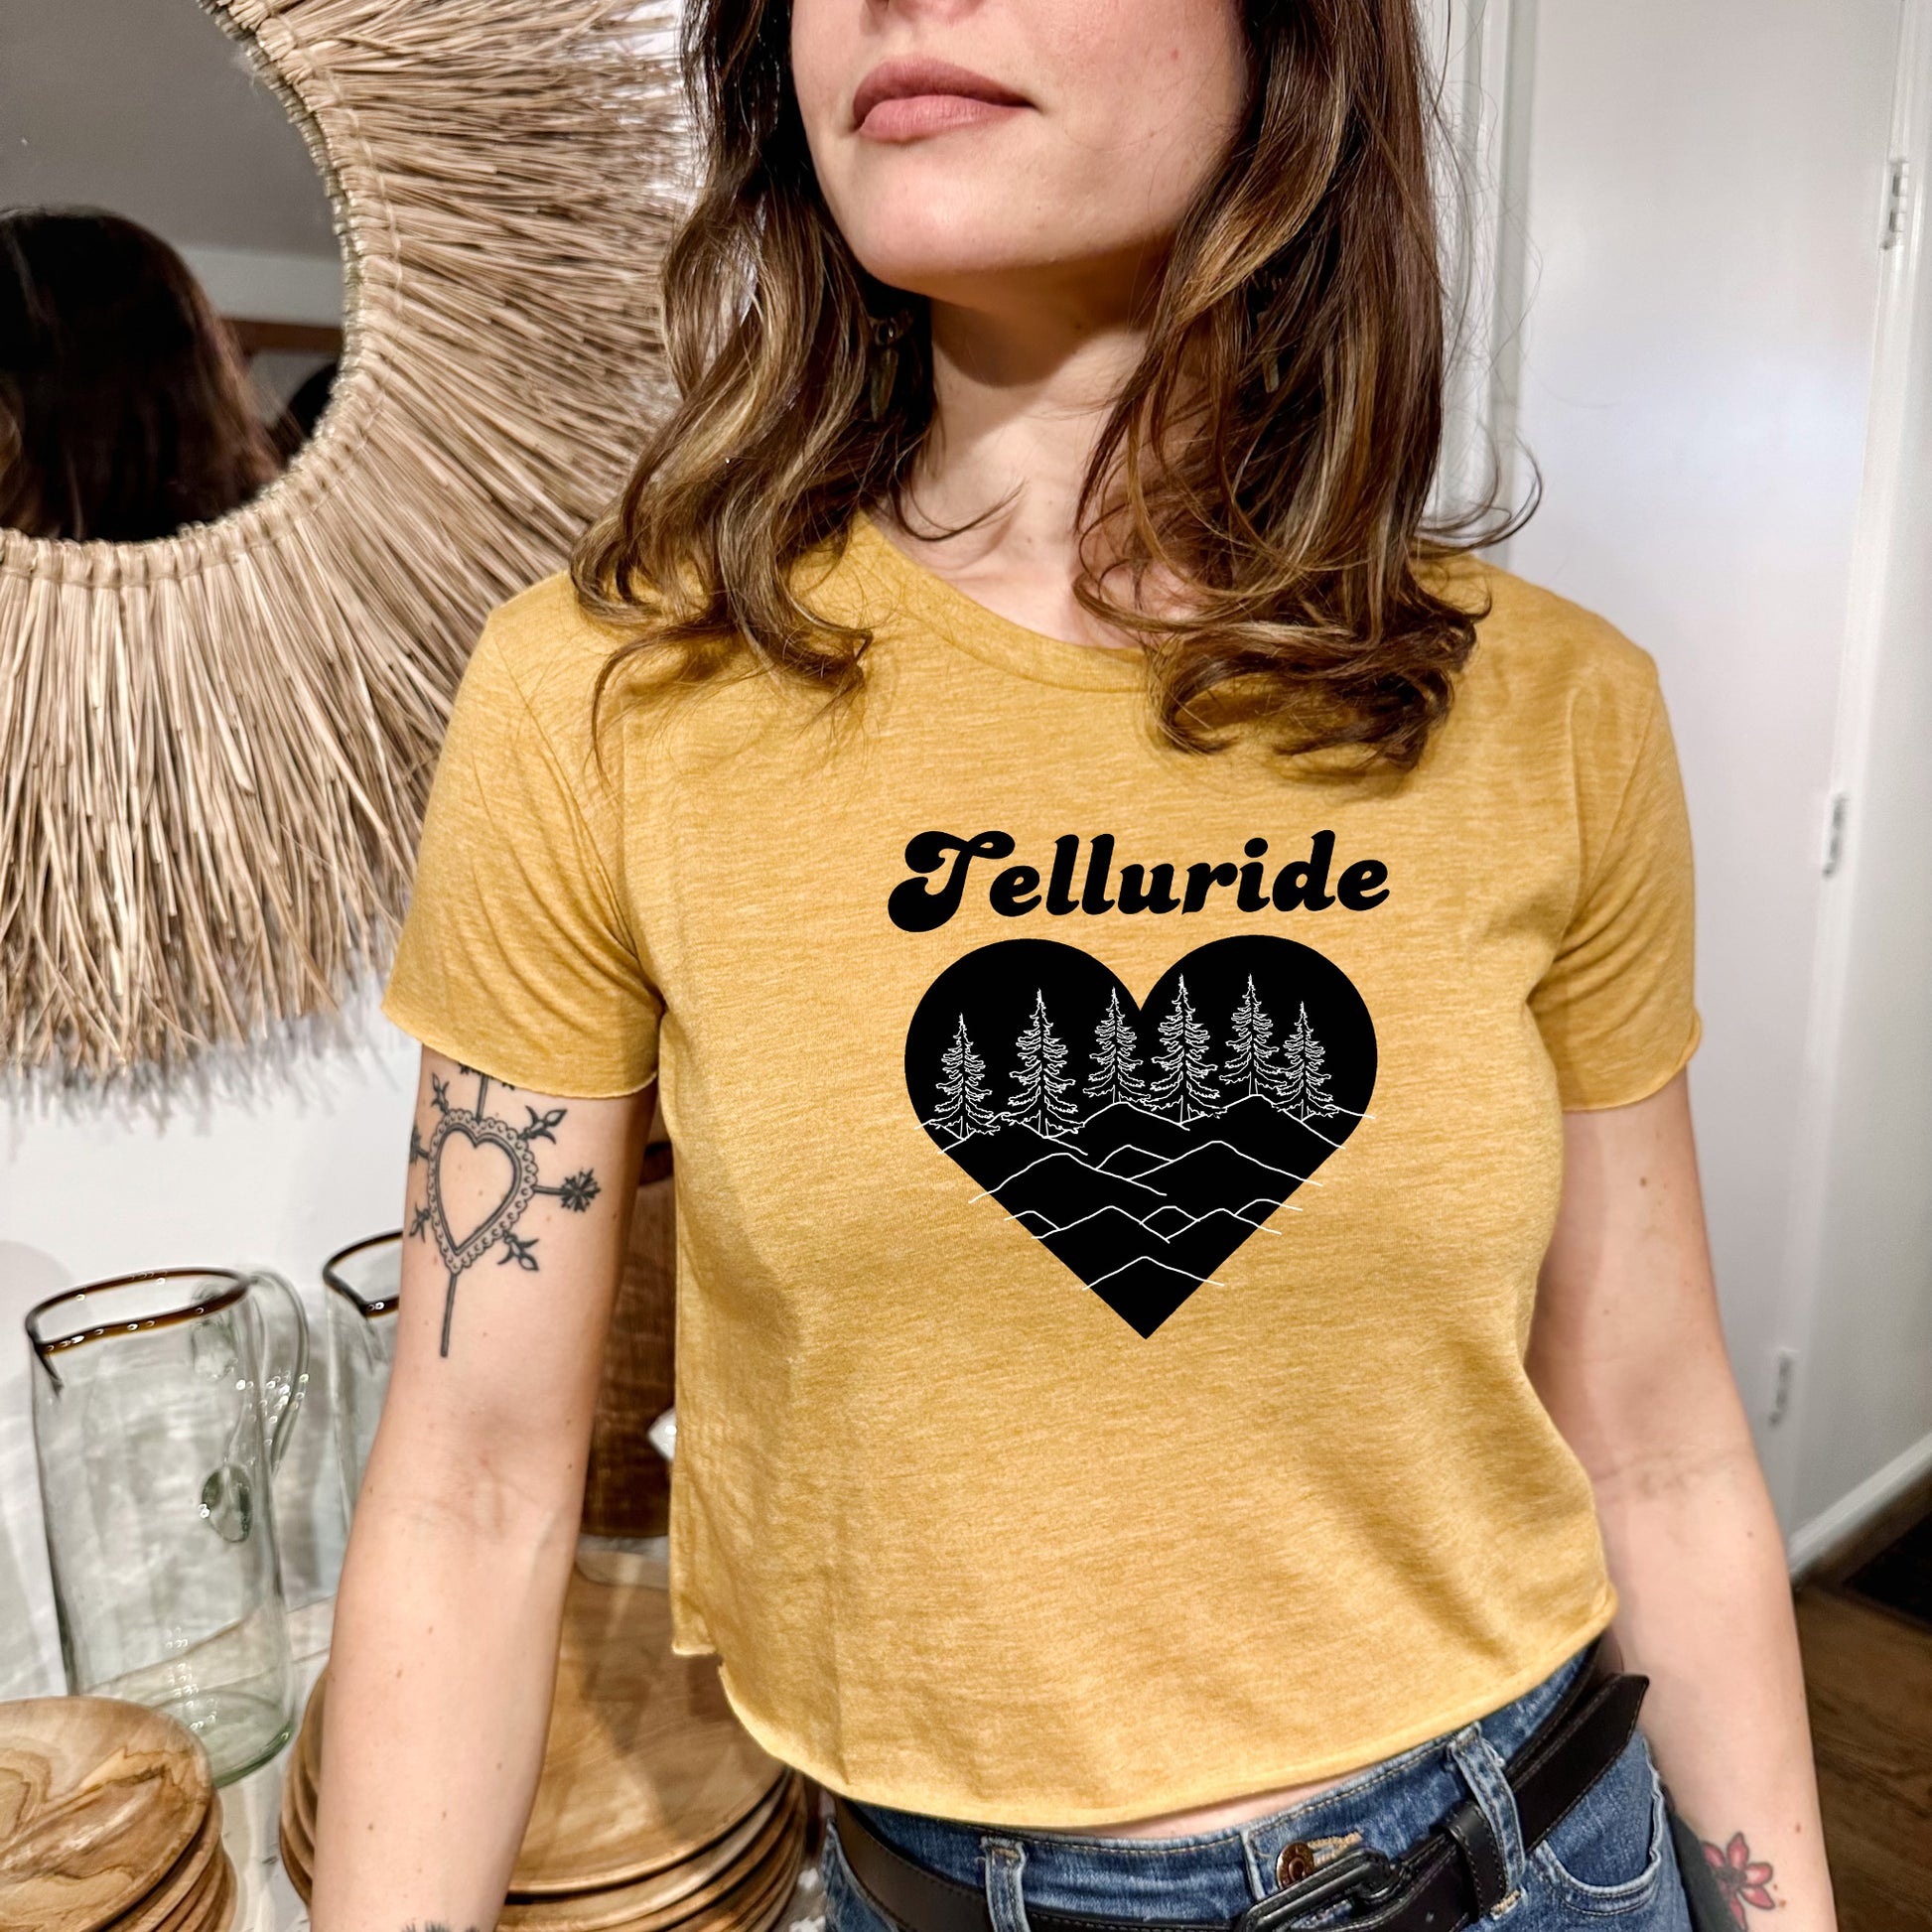 a woman standing in front of a mirror wearing a yellow t - shirt